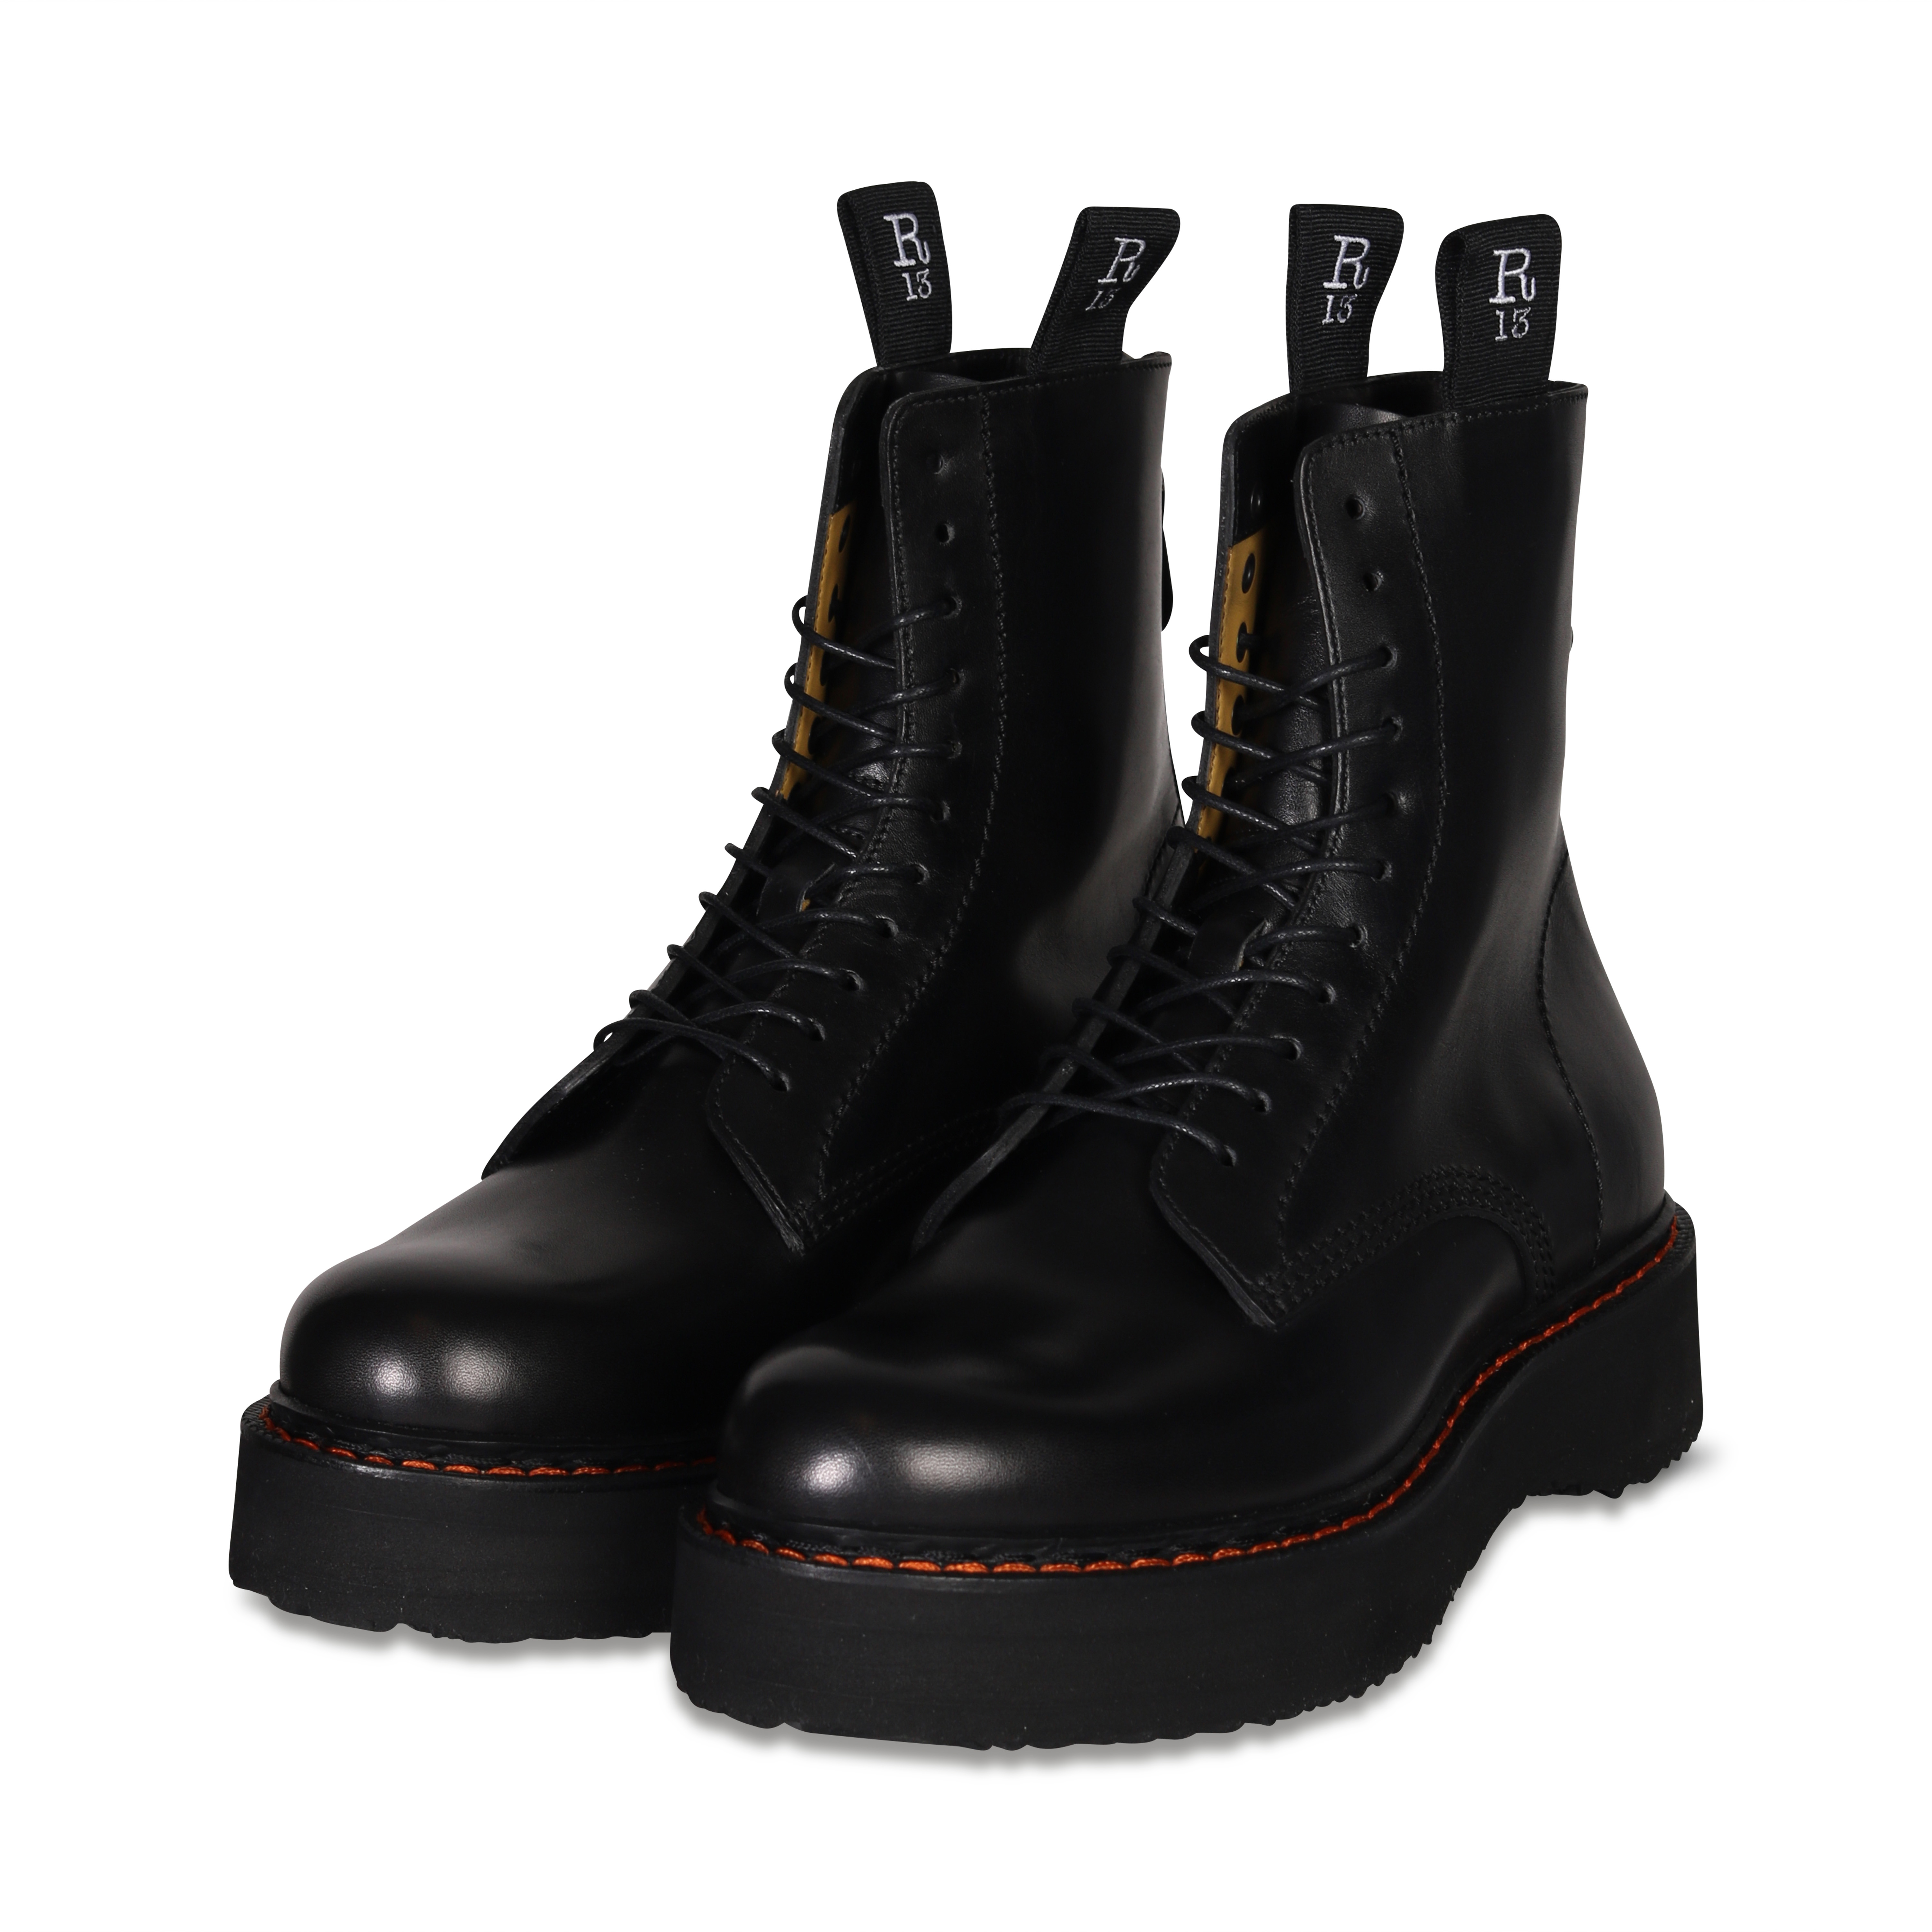 R13 Stack Boots in Black 44